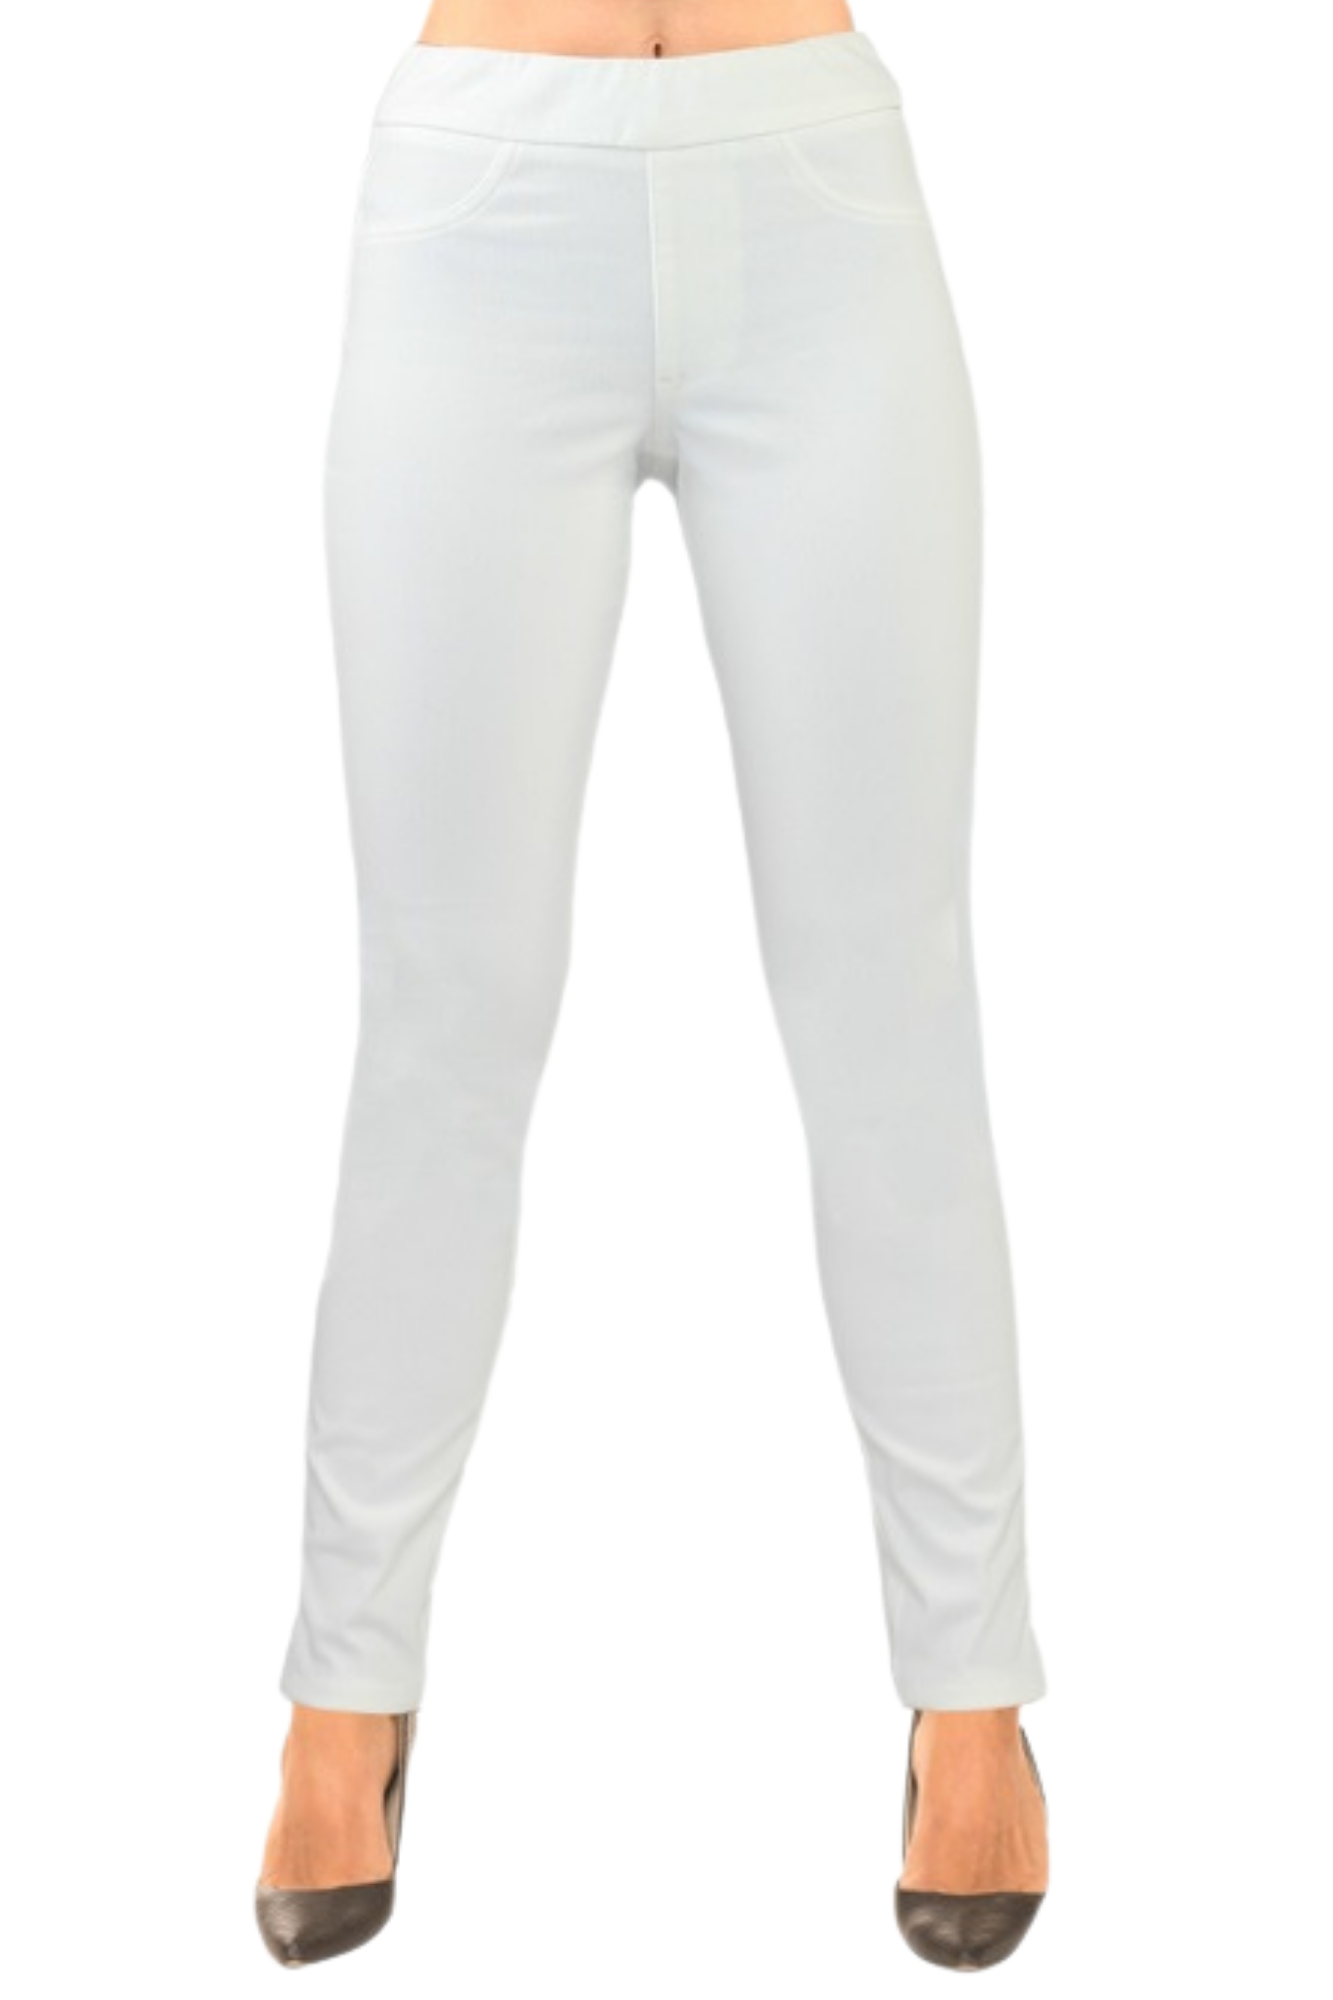 WHITE DENIM PULL ON TROUSERS SAGE LIOR PANTS WOMEN'S